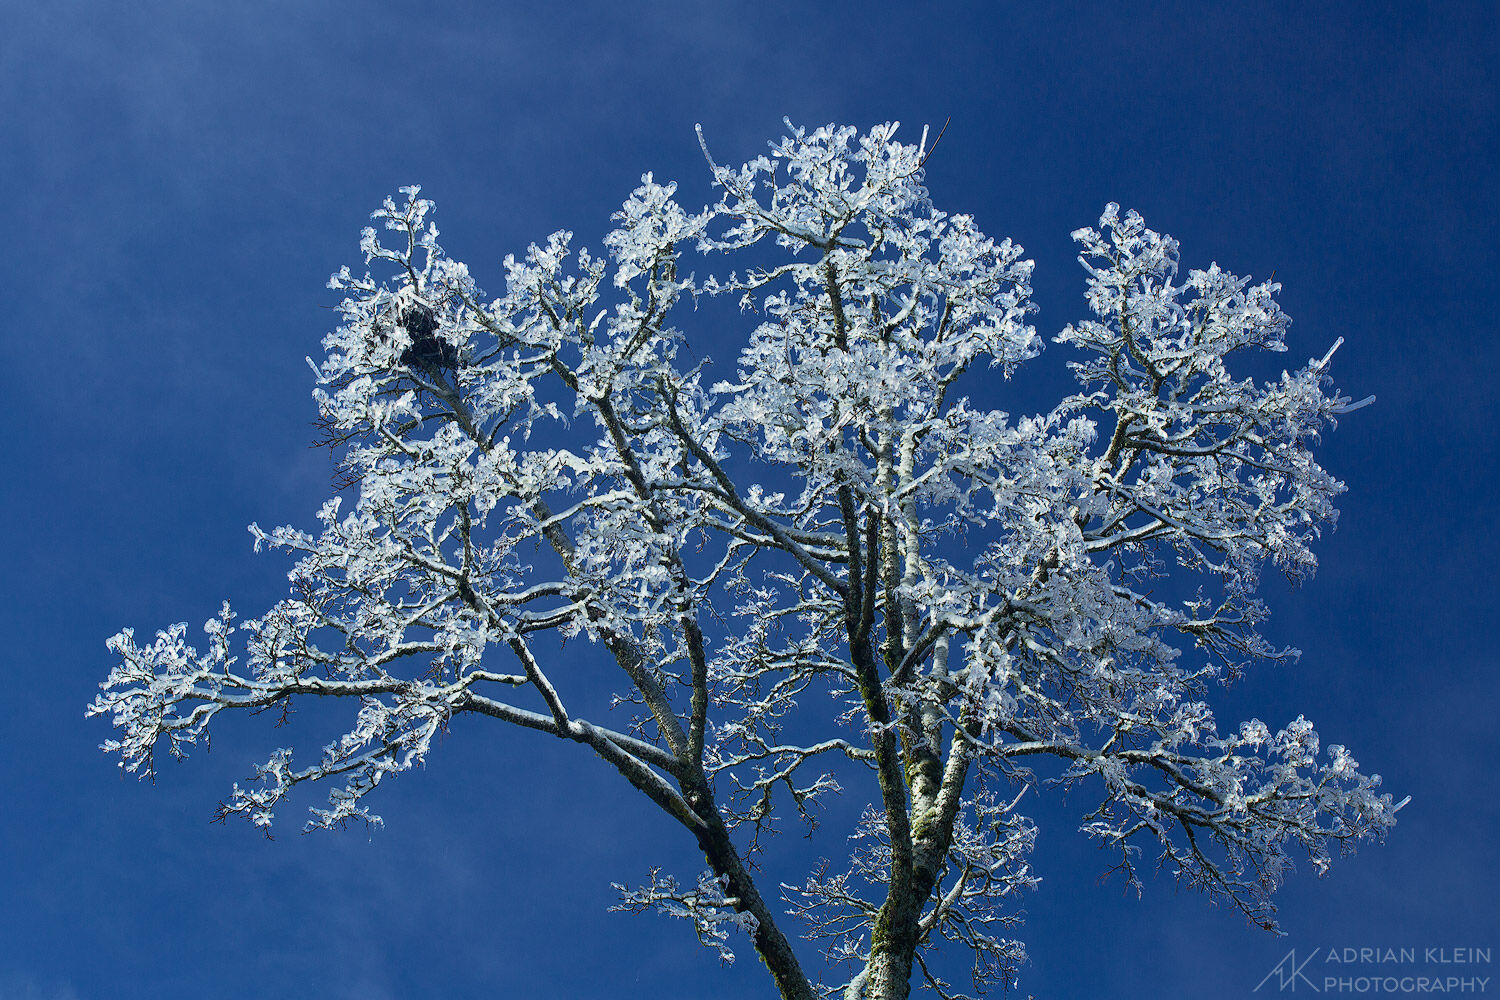 A tree in Portland, Oregon coated in thick ice as the sky clears from a winter storm of freezing rain. Limited Edition of 50.